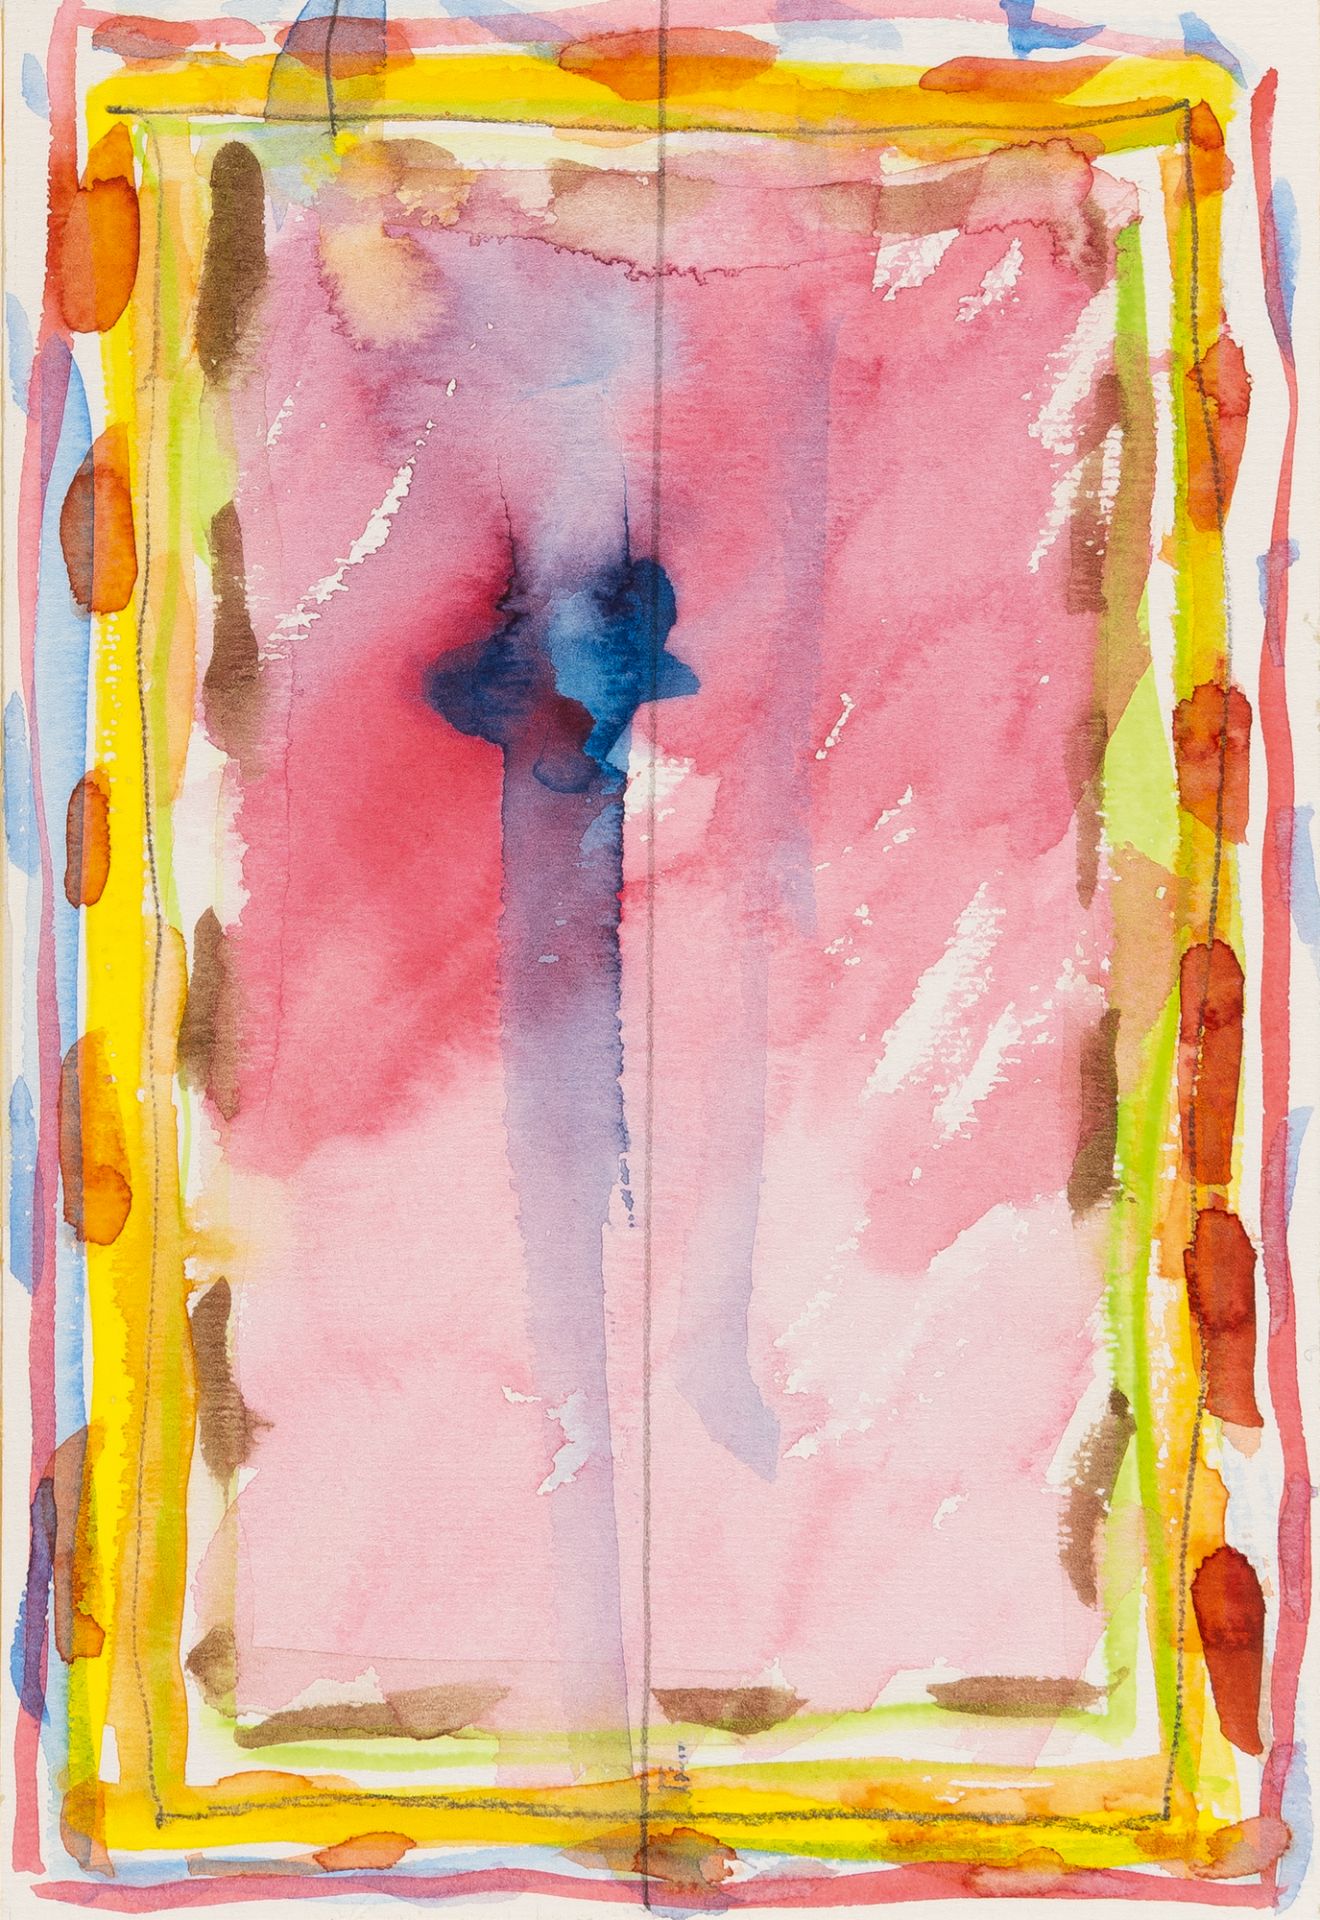 Richard Tuttle (1941 Rahway/New Jersey) – „Valencia Frames“.Watercolour on fine cardboard. 1992. ca.